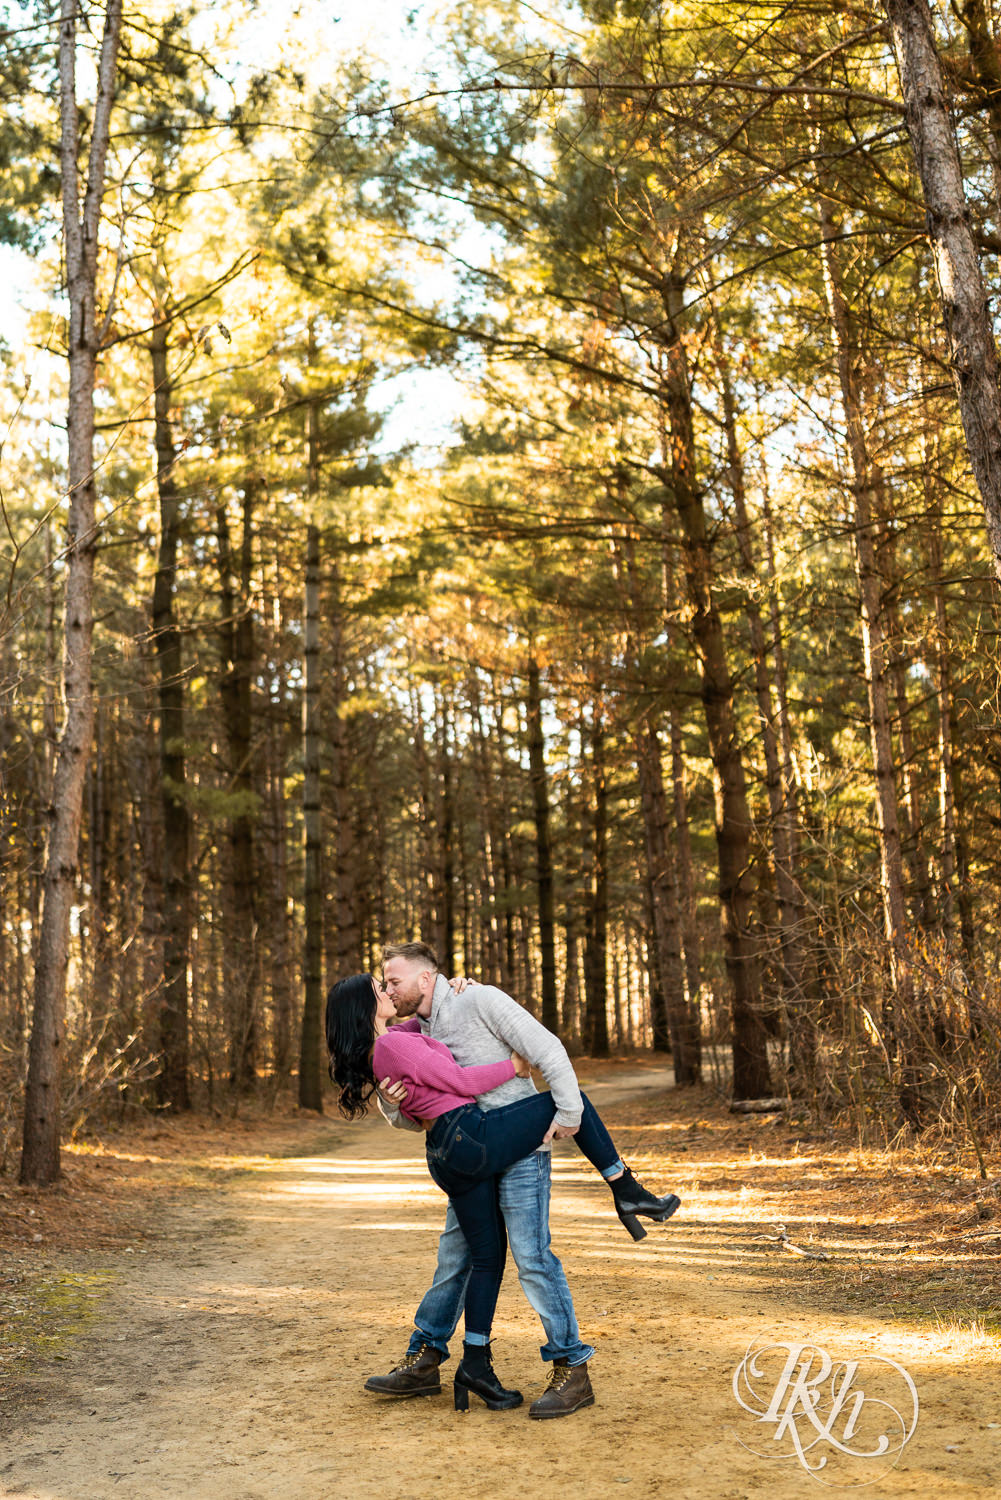 Man in sweater and jeans and woman in pink sweater and jeans kiss in woods at Lebanon Hills Regional Park in Eagan, Minnesota.